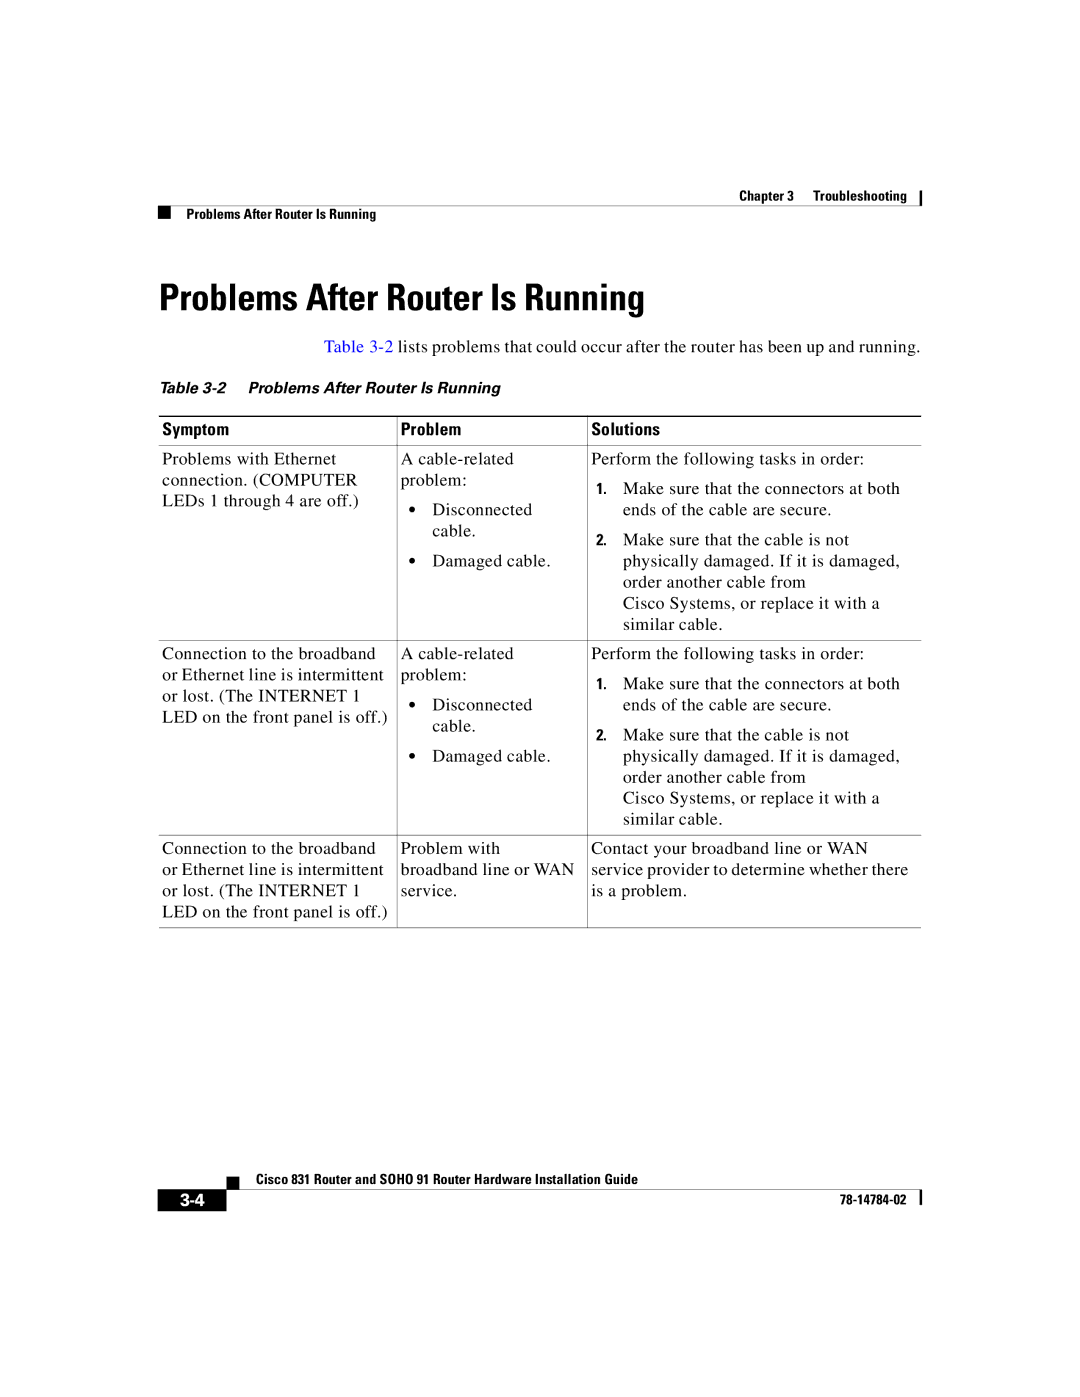 Cisco Systems Cisco 831 manual Problems After Router Is Running 